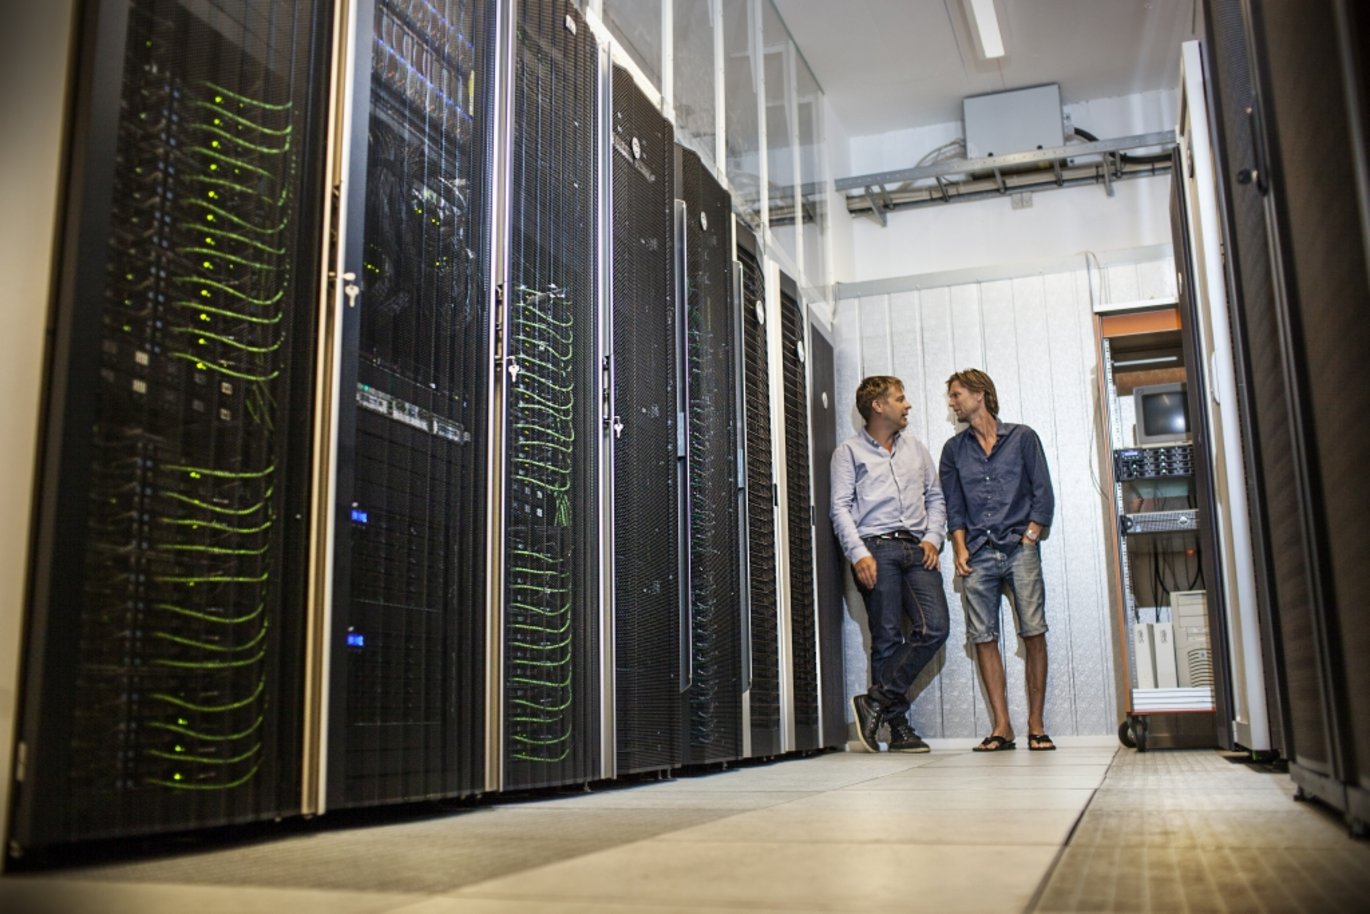 The Genome DK HPC HUB supercomputer at Aarhus University was used for a considerable part of the data processing in connection with mapping the Danish genome. Professor Anders Børglum, Department of Biomedicine (right), is seen here with Professor Mikkel